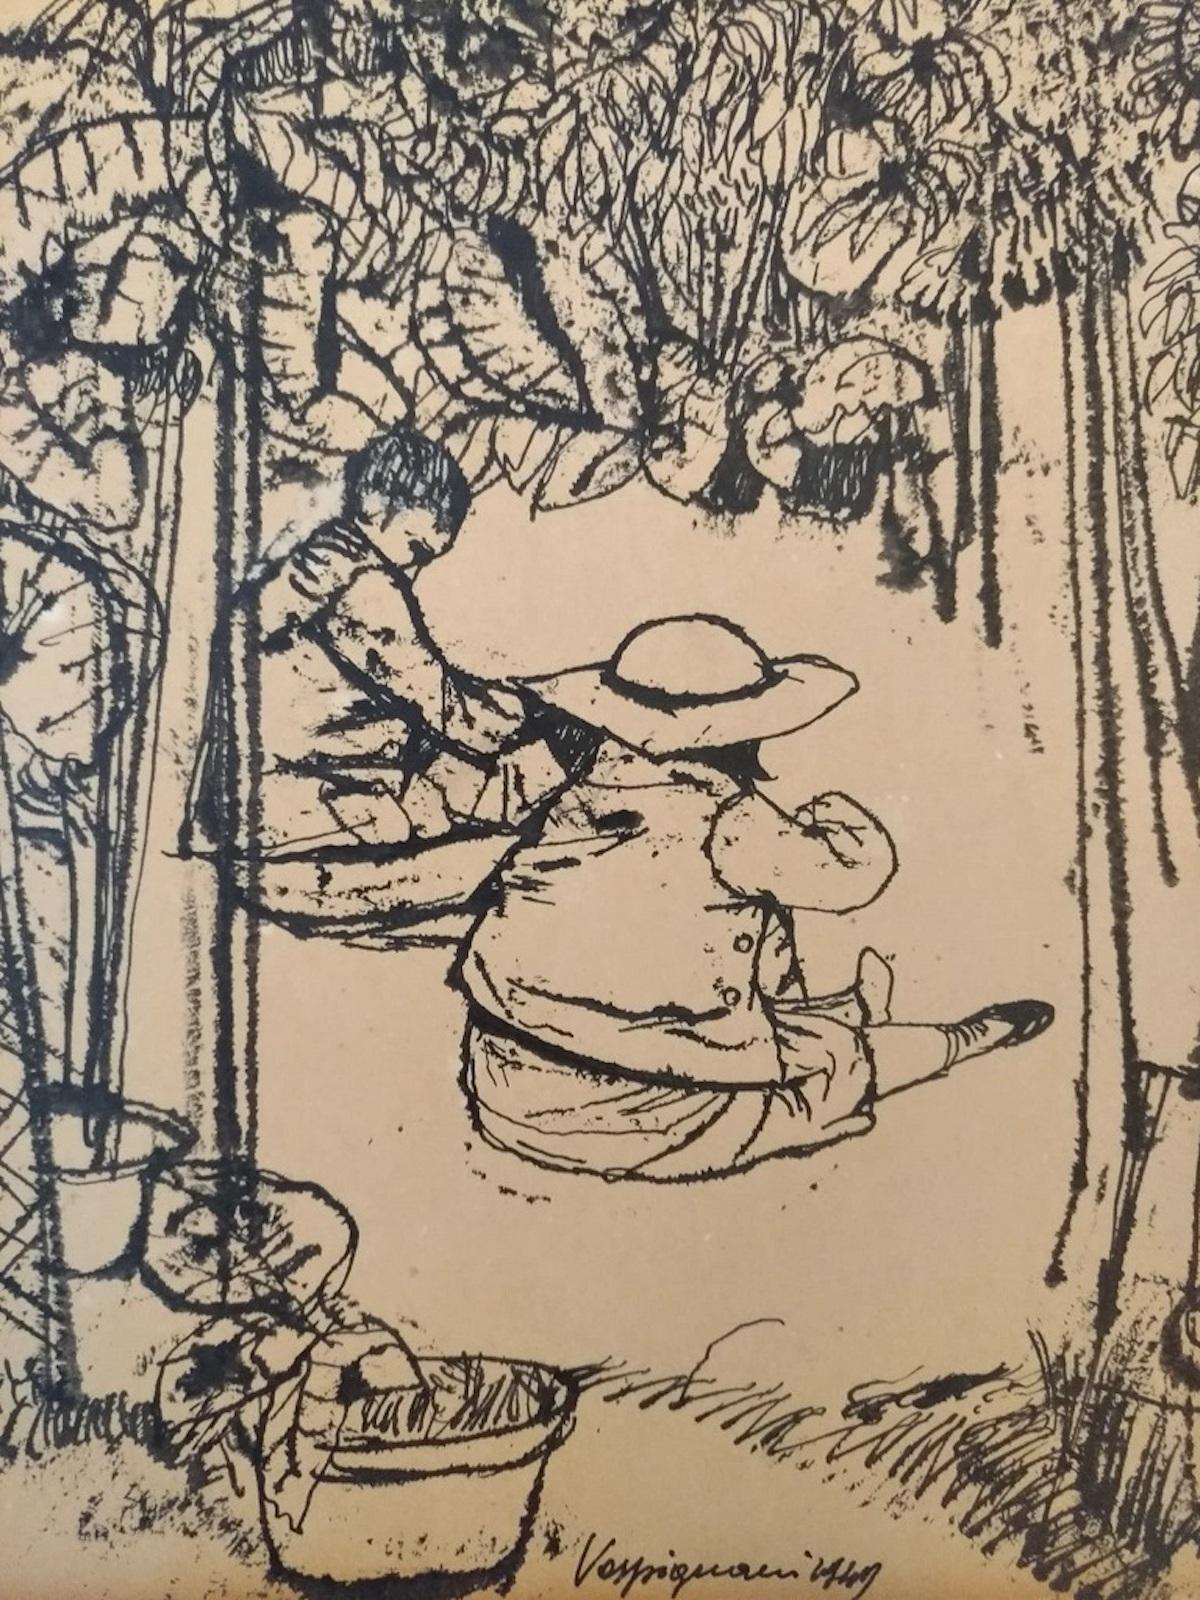 Children in the Garden is an original Modern Artwork realized in 1949 by the Italian artist Renzo Vespignani (Rome, 1924 - Rome, 2001). 

Original China Ink and black pencil on ivory paper. 

Hand-signed and dated by the artist on the lower right